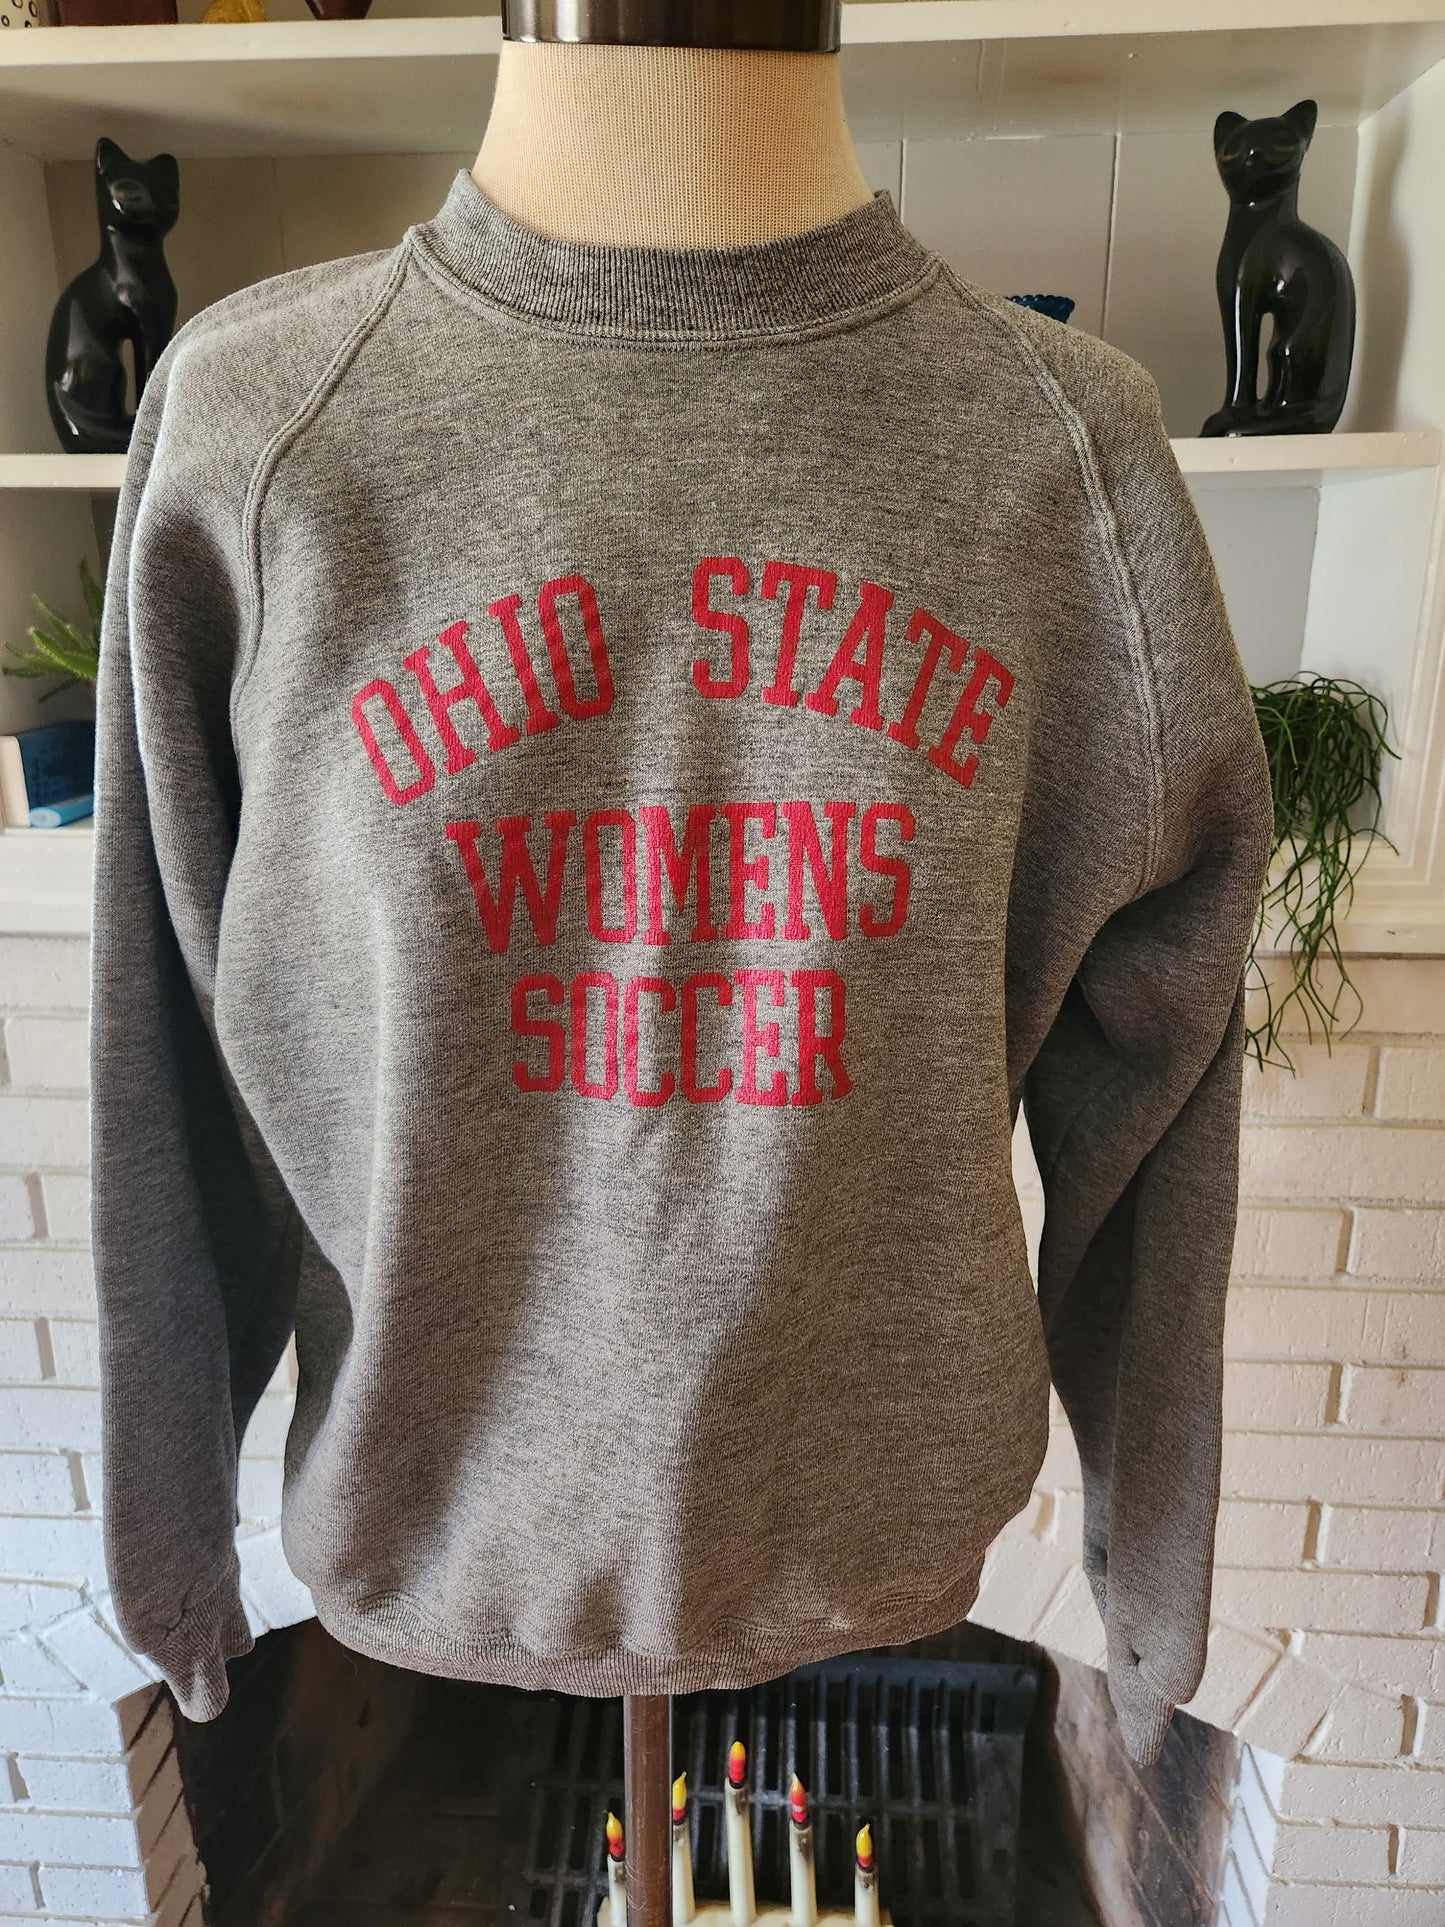 Vintage Ohio State Womens Soccer Sweatshirt by Russell Super Weights